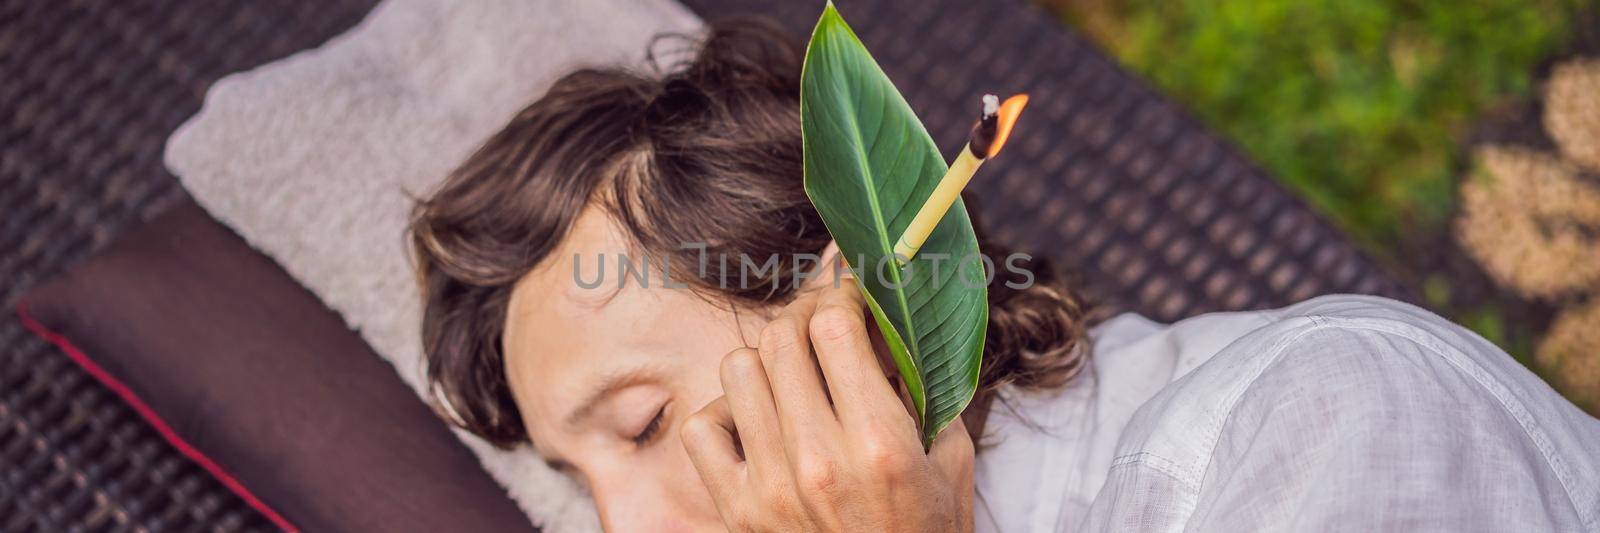 man having an ear candle therapy against the backdrop of a tropical garden BANNER, LONG FORMAT by galitskaya